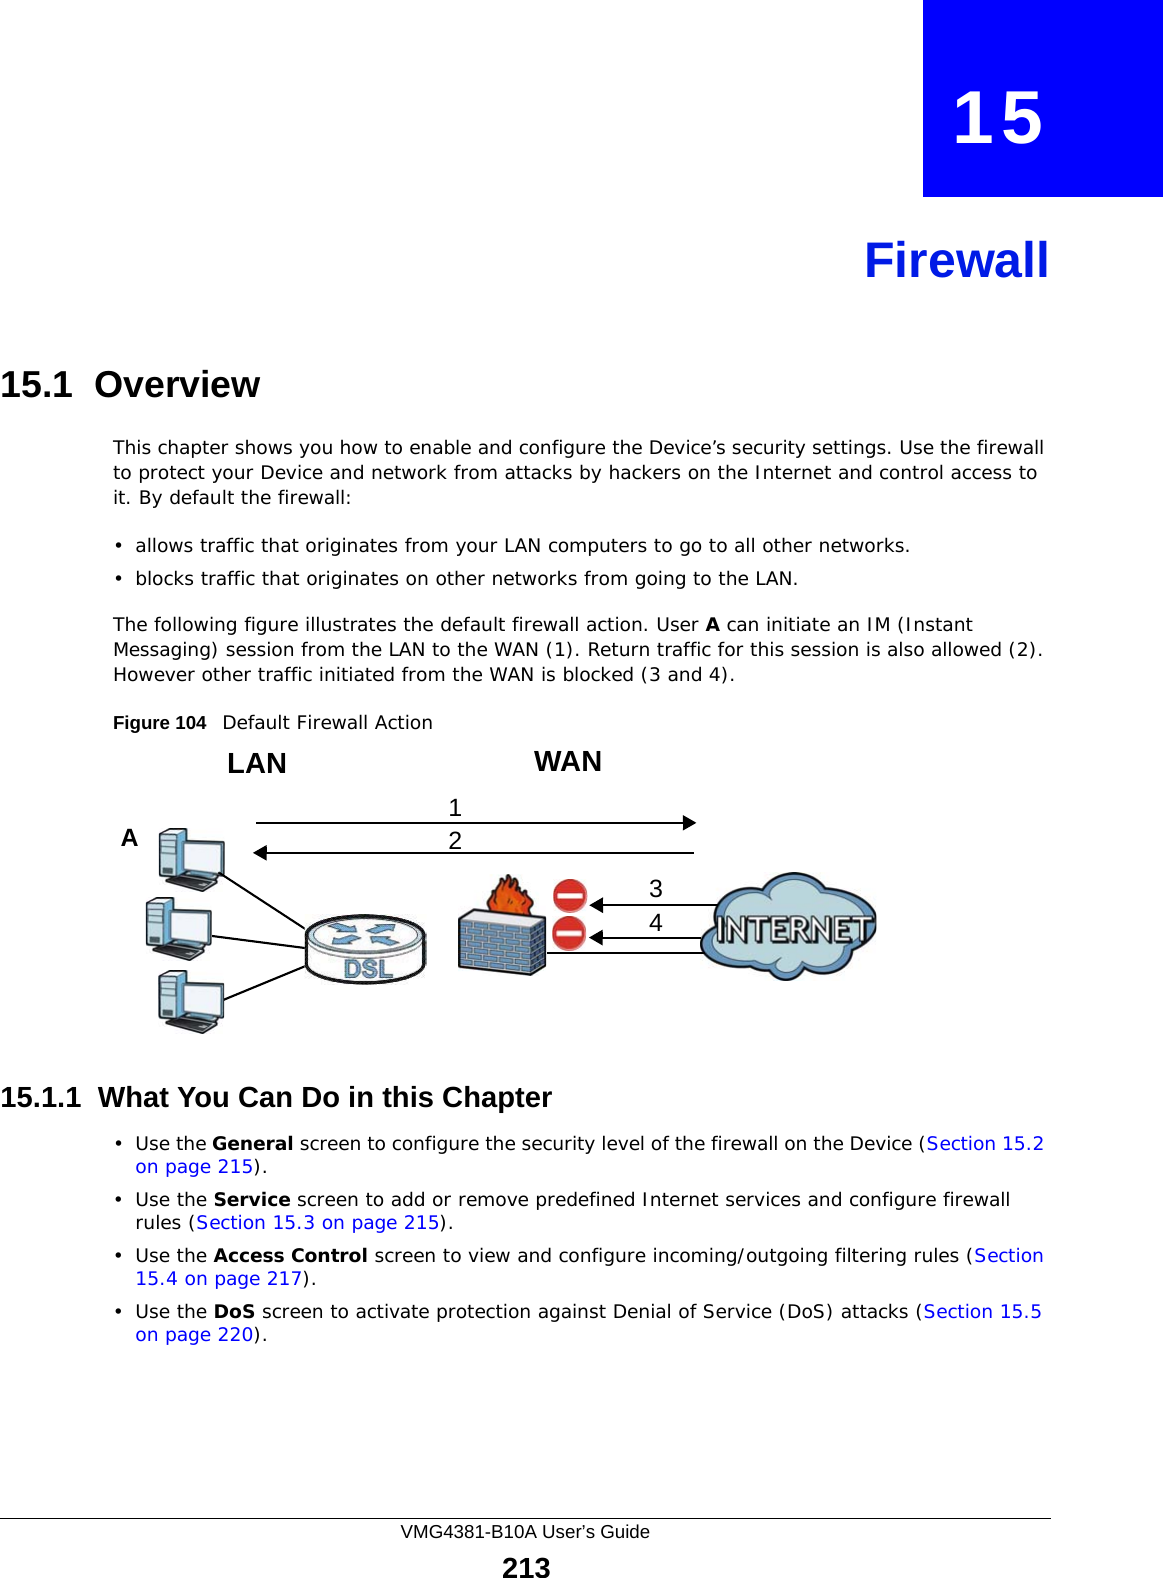 VMG4381-B10A User’s Guide213CHAPTER   15Firewall15.1  OverviewThis chapter shows you how to enable and configure the Device’s security settings. Use the firewall to protect your Device and network from attacks by hackers on the Internet and control access to it. By default the firewall:• allows traffic that originates from your LAN computers to go to all other networks. • blocks traffic that originates on other networks from going to the LAN. The following figure illustrates the default firewall action. User A can initiate an IM (Instant Messaging) session from the LAN to the WAN (1). Return traffic for this session is also allowed (2). However other traffic initiated from the WAN is blocked (3 and 4).Figure 104   Default Firewall Action15.1.1  What You Can Do in this Chapter•Use the General screen to configure the security level of the firewall on the Device (Section 15.2 on page 215).•Use the Service screen to add or remove predefined Internet services and configure firewall rules (Section 15.3 on page 215).•Use the Access Control screen to view and configure incoming/outgoing filtering rules (Section 15.4 on page 217). •Use the DoS screen to activate protection against Denial of Service (DoS) attacks (Section 15.5 on page 220).WANLAN3412A